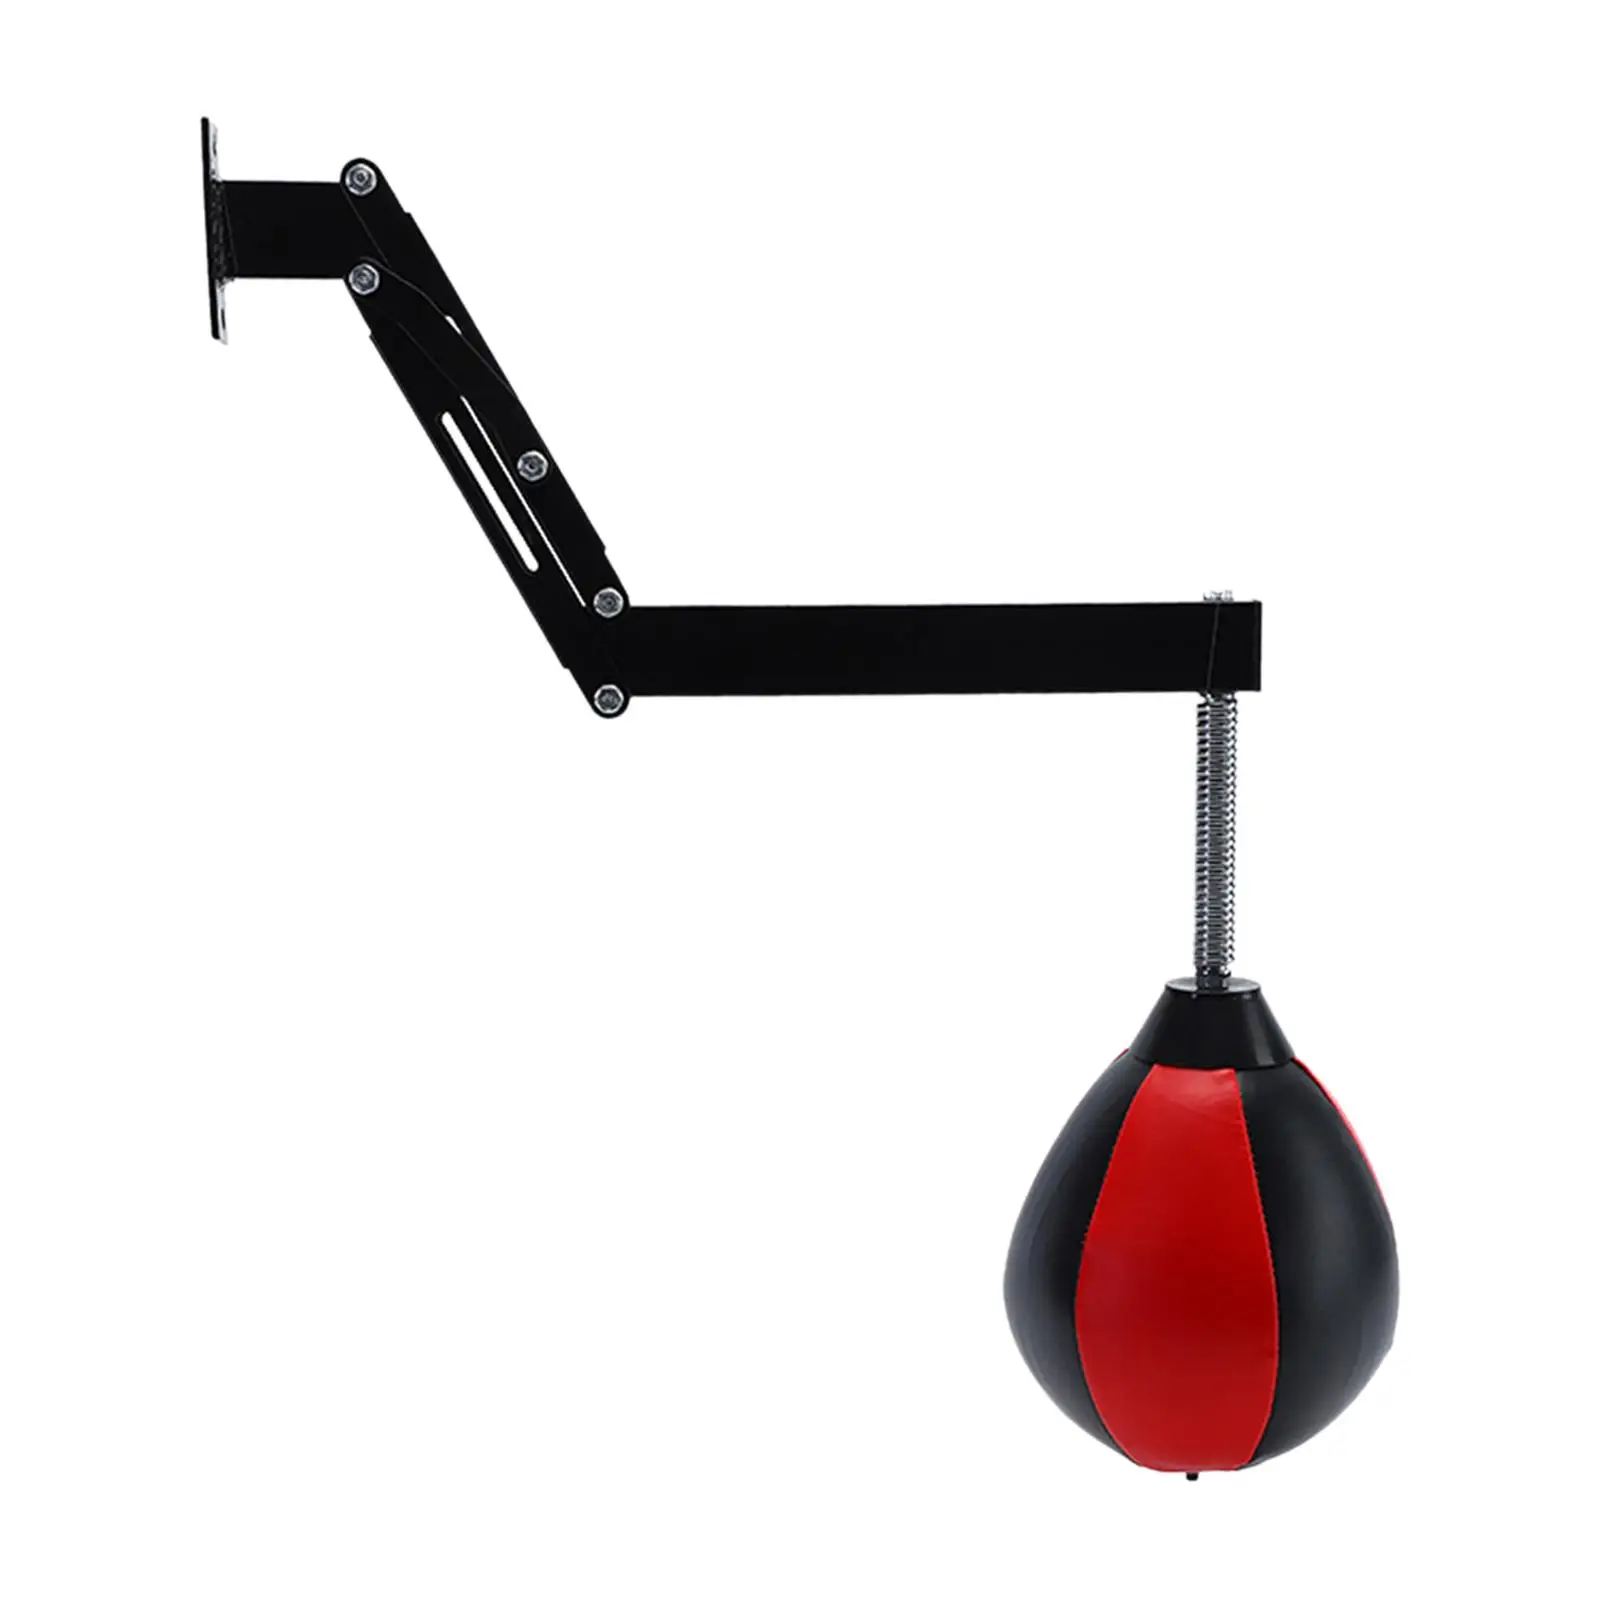 Speed Bag Inflatable Adjustable PU Leather Heavy Duty Wall Mount Boxing Punching Bag for Training Sanda Sports Workout